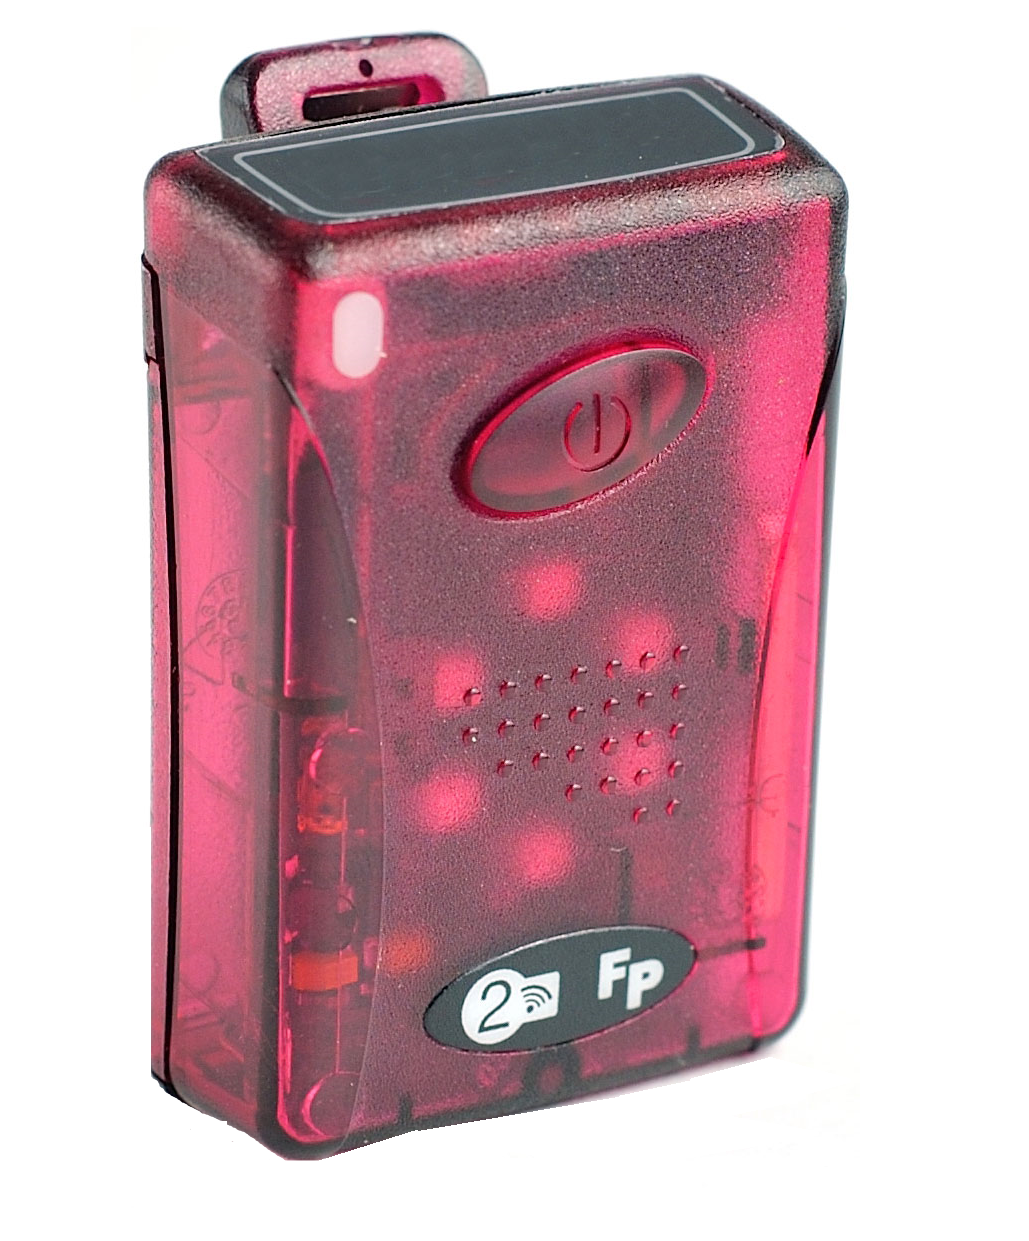 A Frequency Precision Ltd red bleeper pager